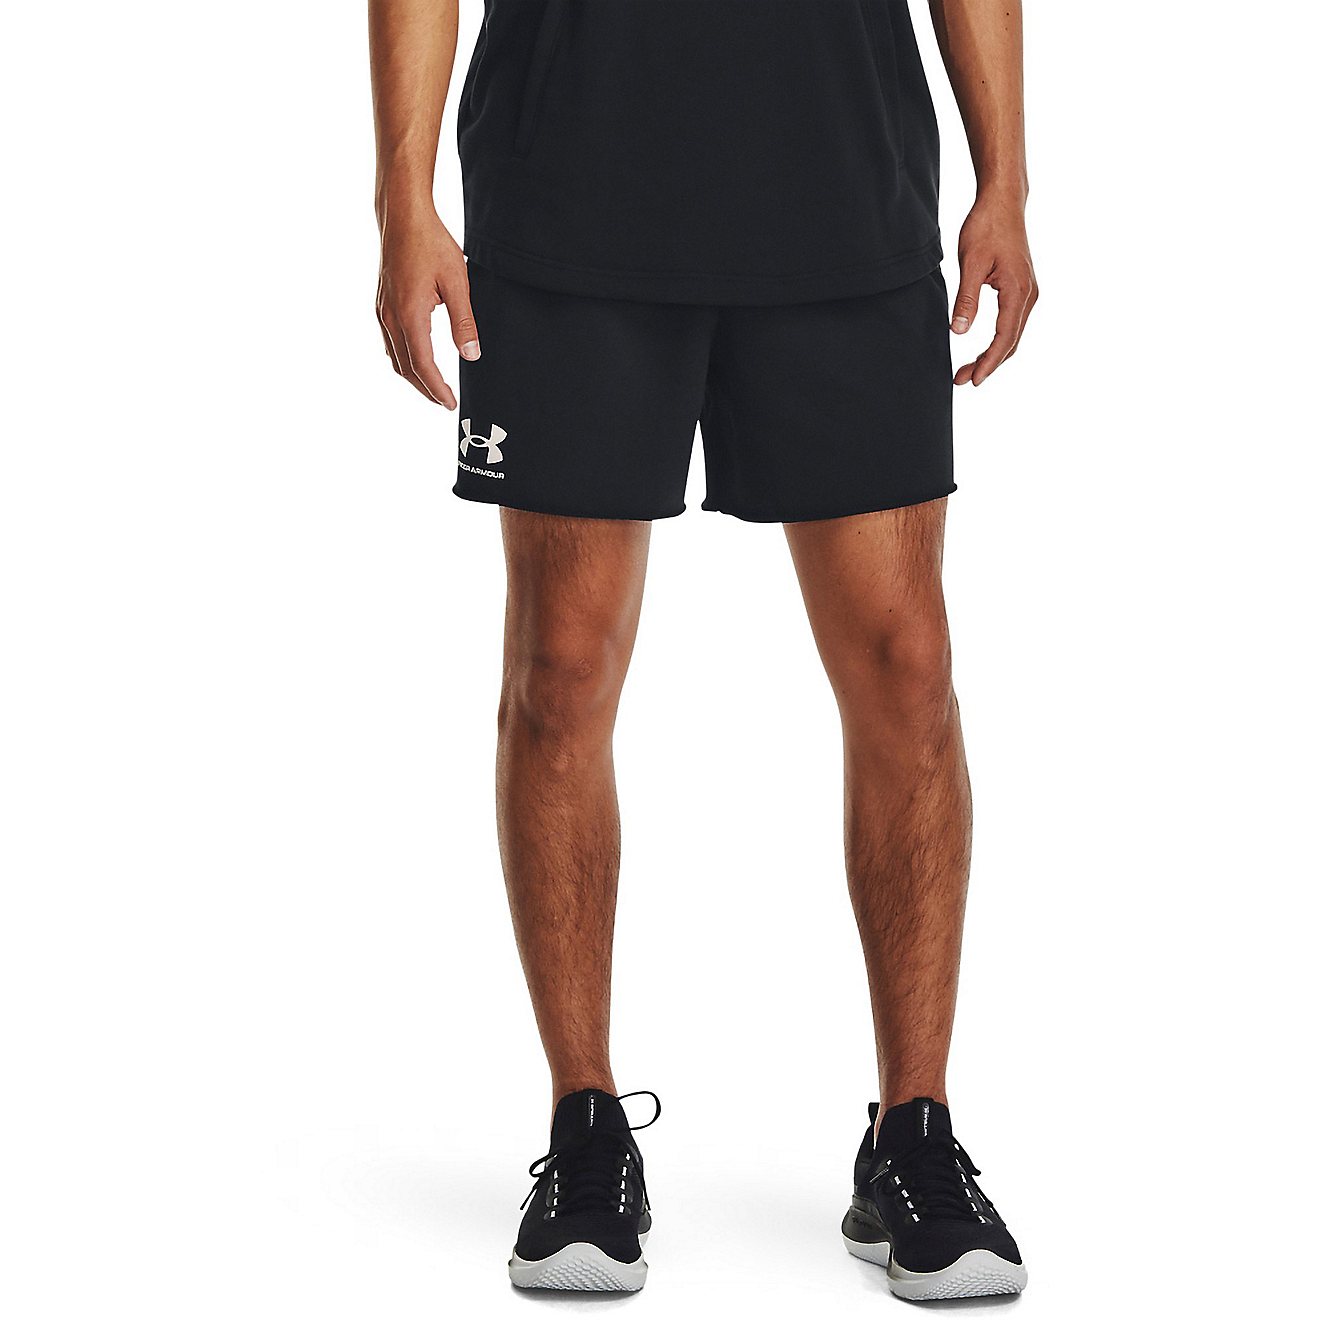 6 | Shorts Men\'s Rival Terry in Under Armour Academy